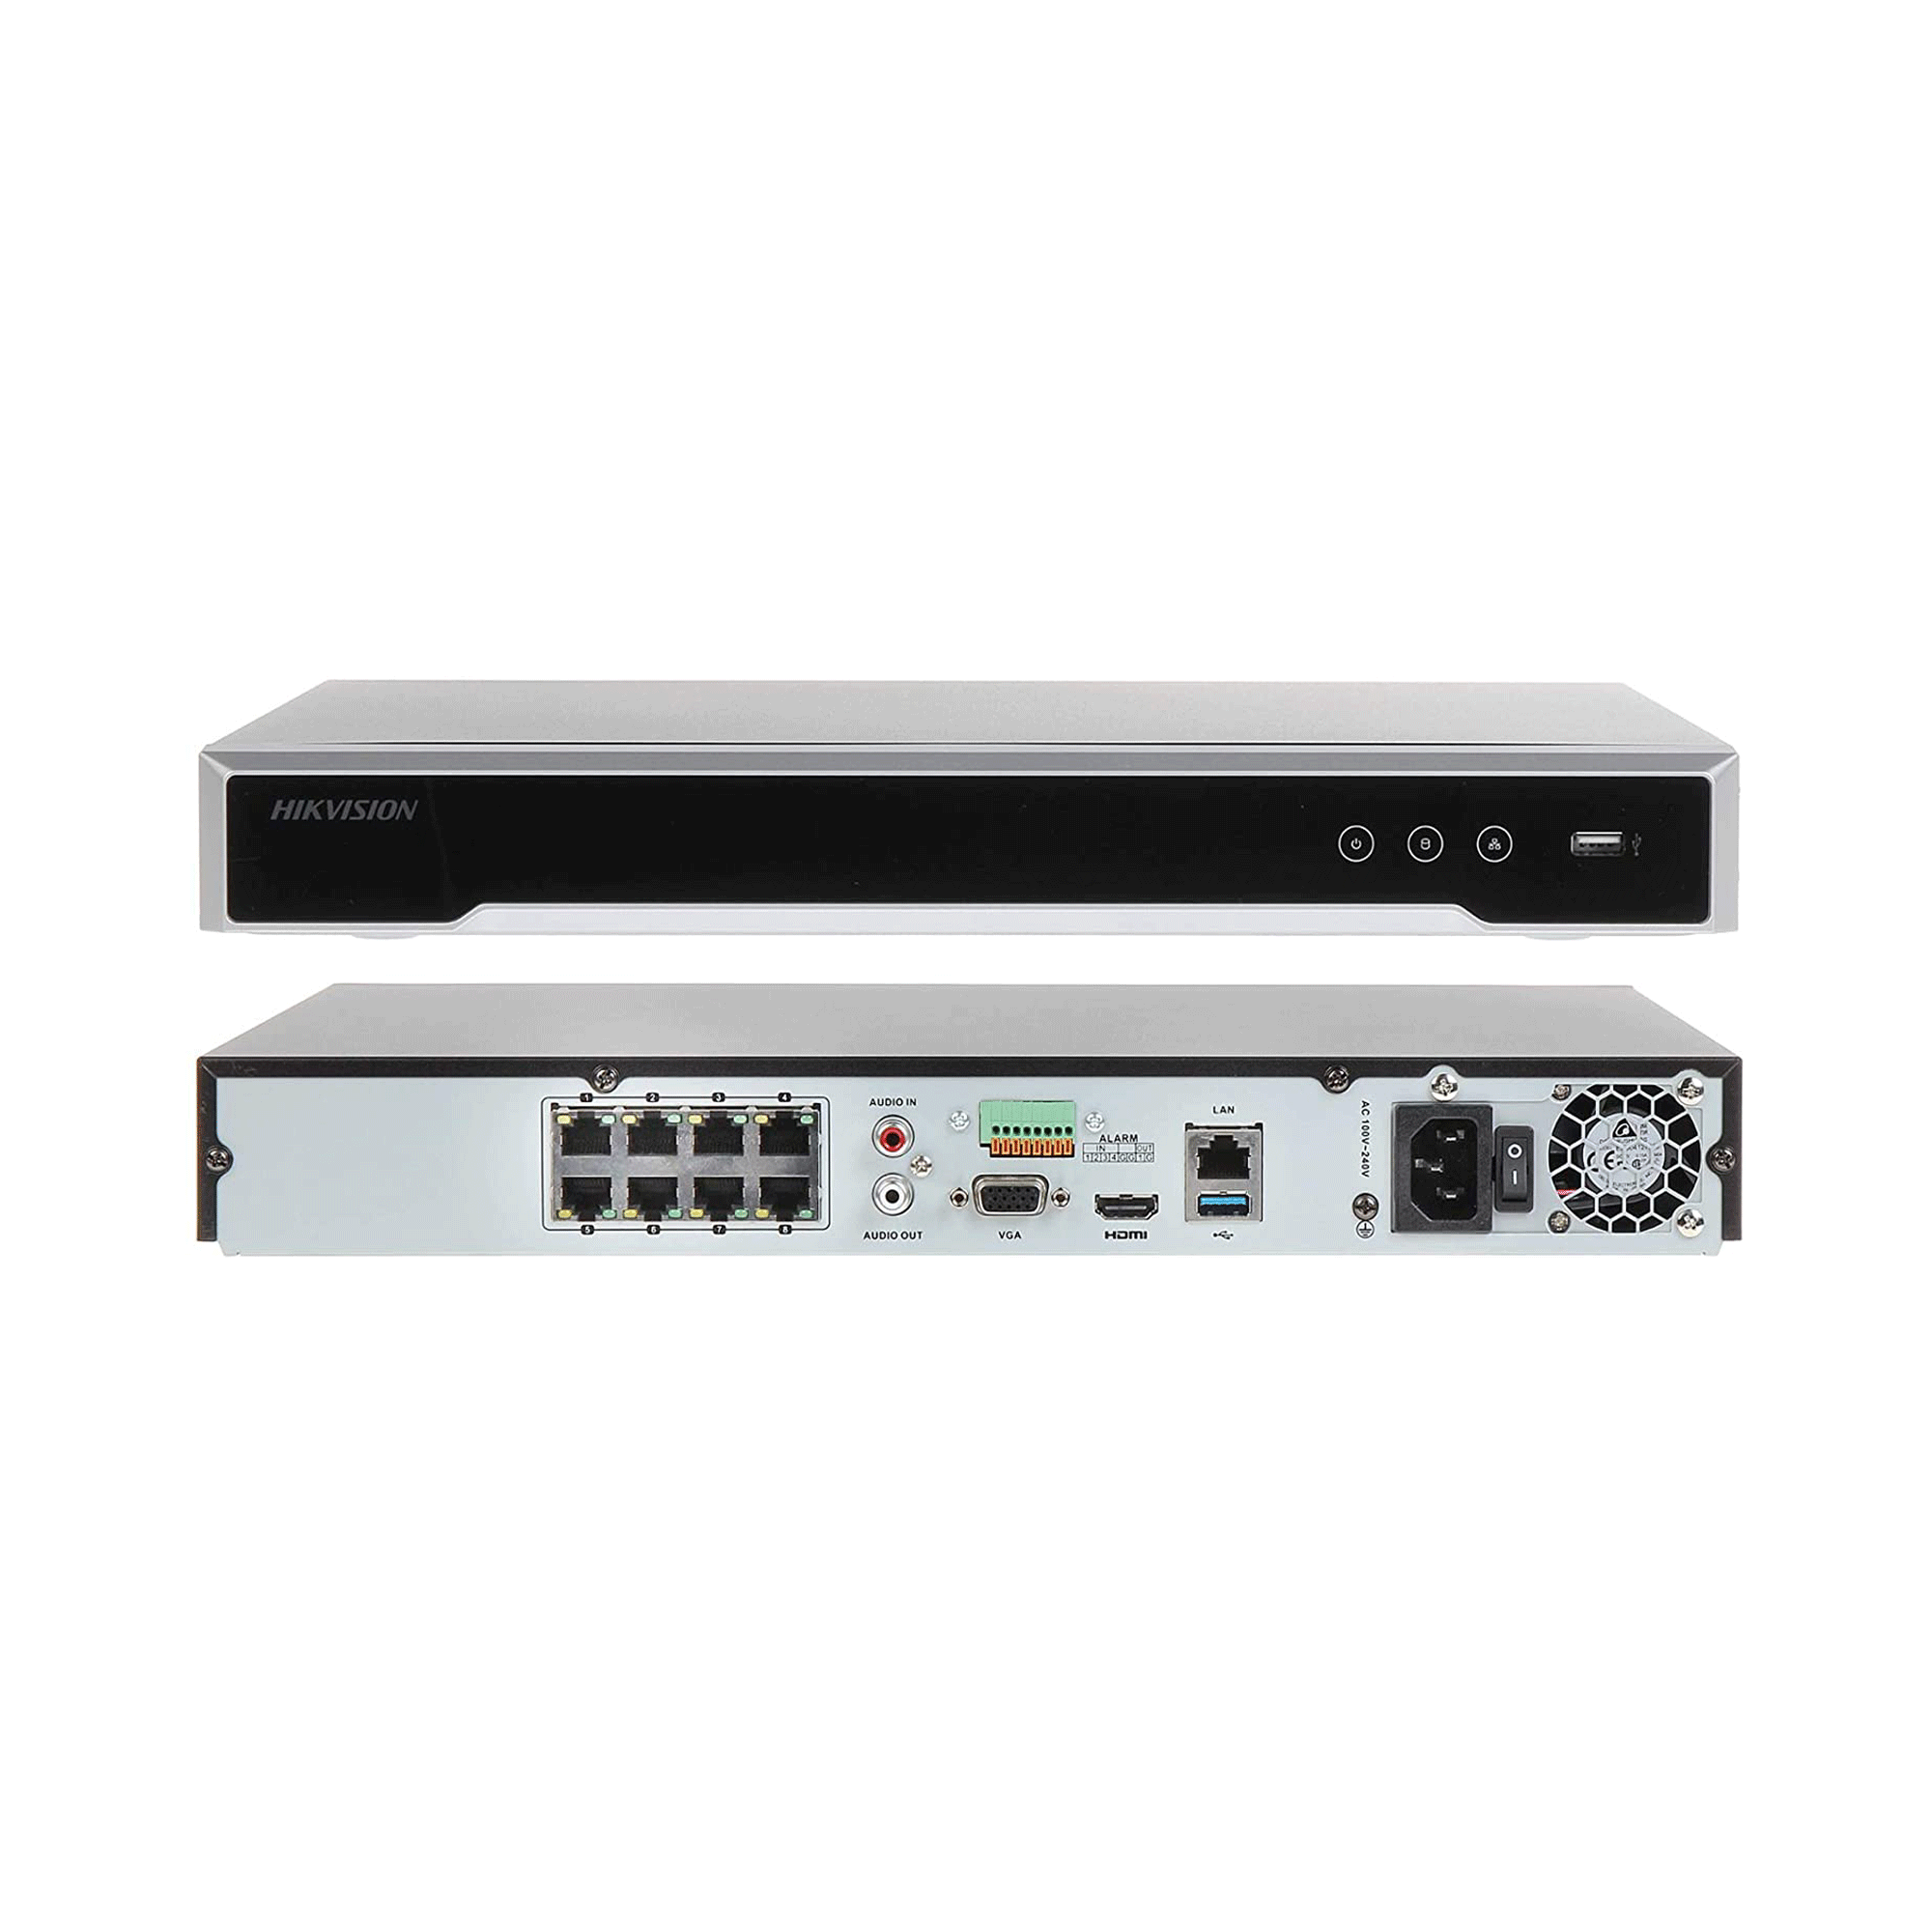 NVR HIKVISION 8 CANALES (8 Mpx) Hikvision